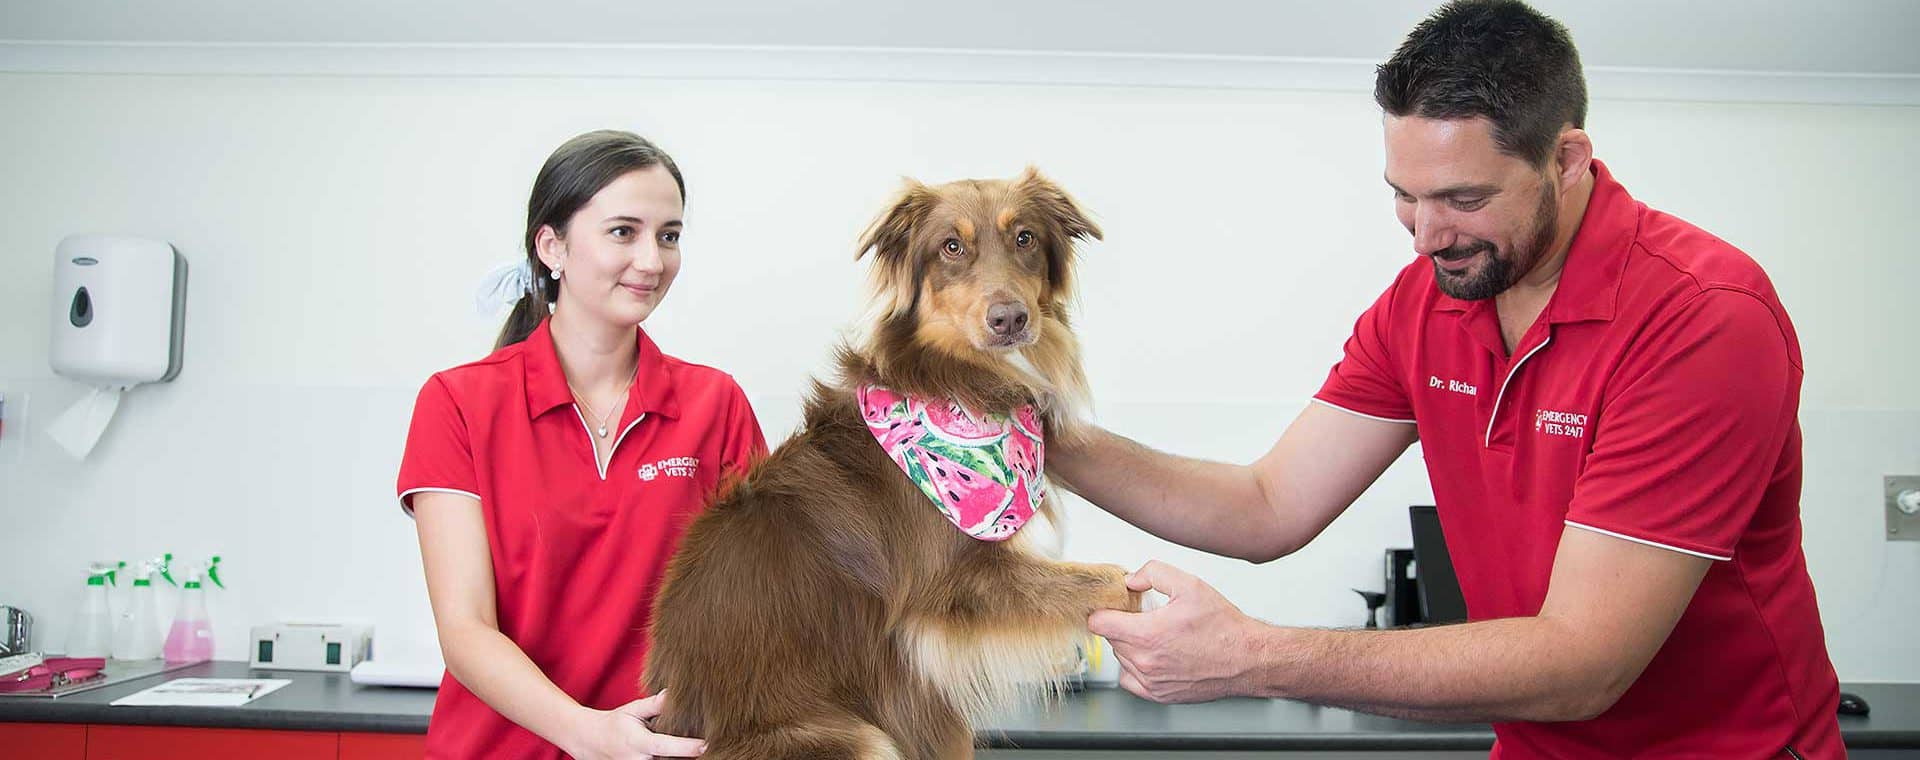 CAIRNS EMERGENCY VETS 